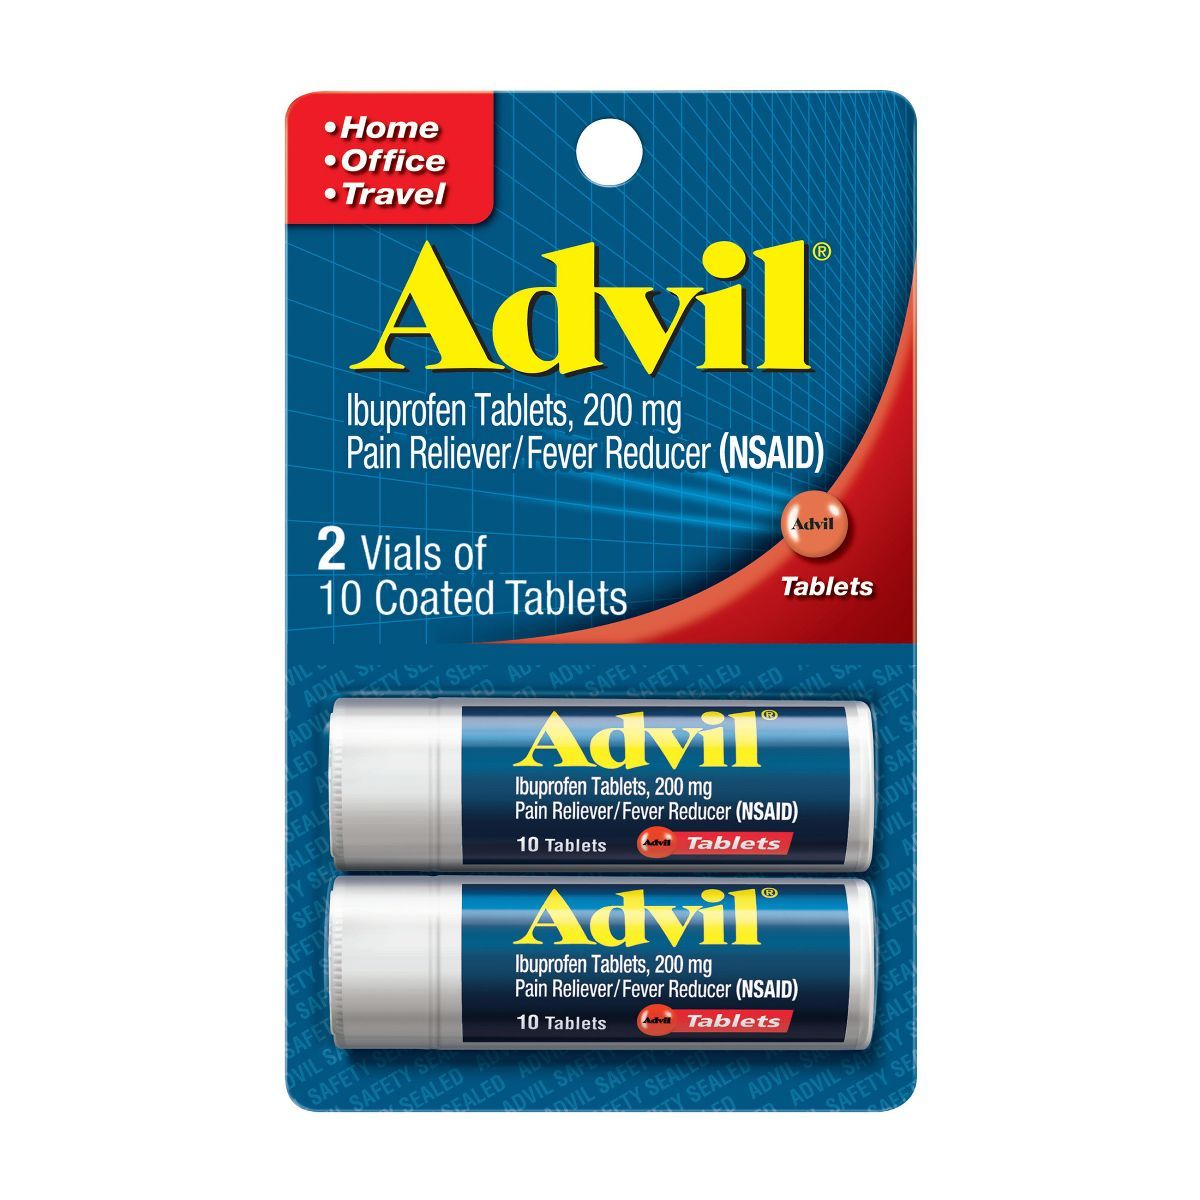 Advil Pain Reliever/Fever Reducer Coated Tablets - Ibuprofen (NSAID) - 20ct | Target